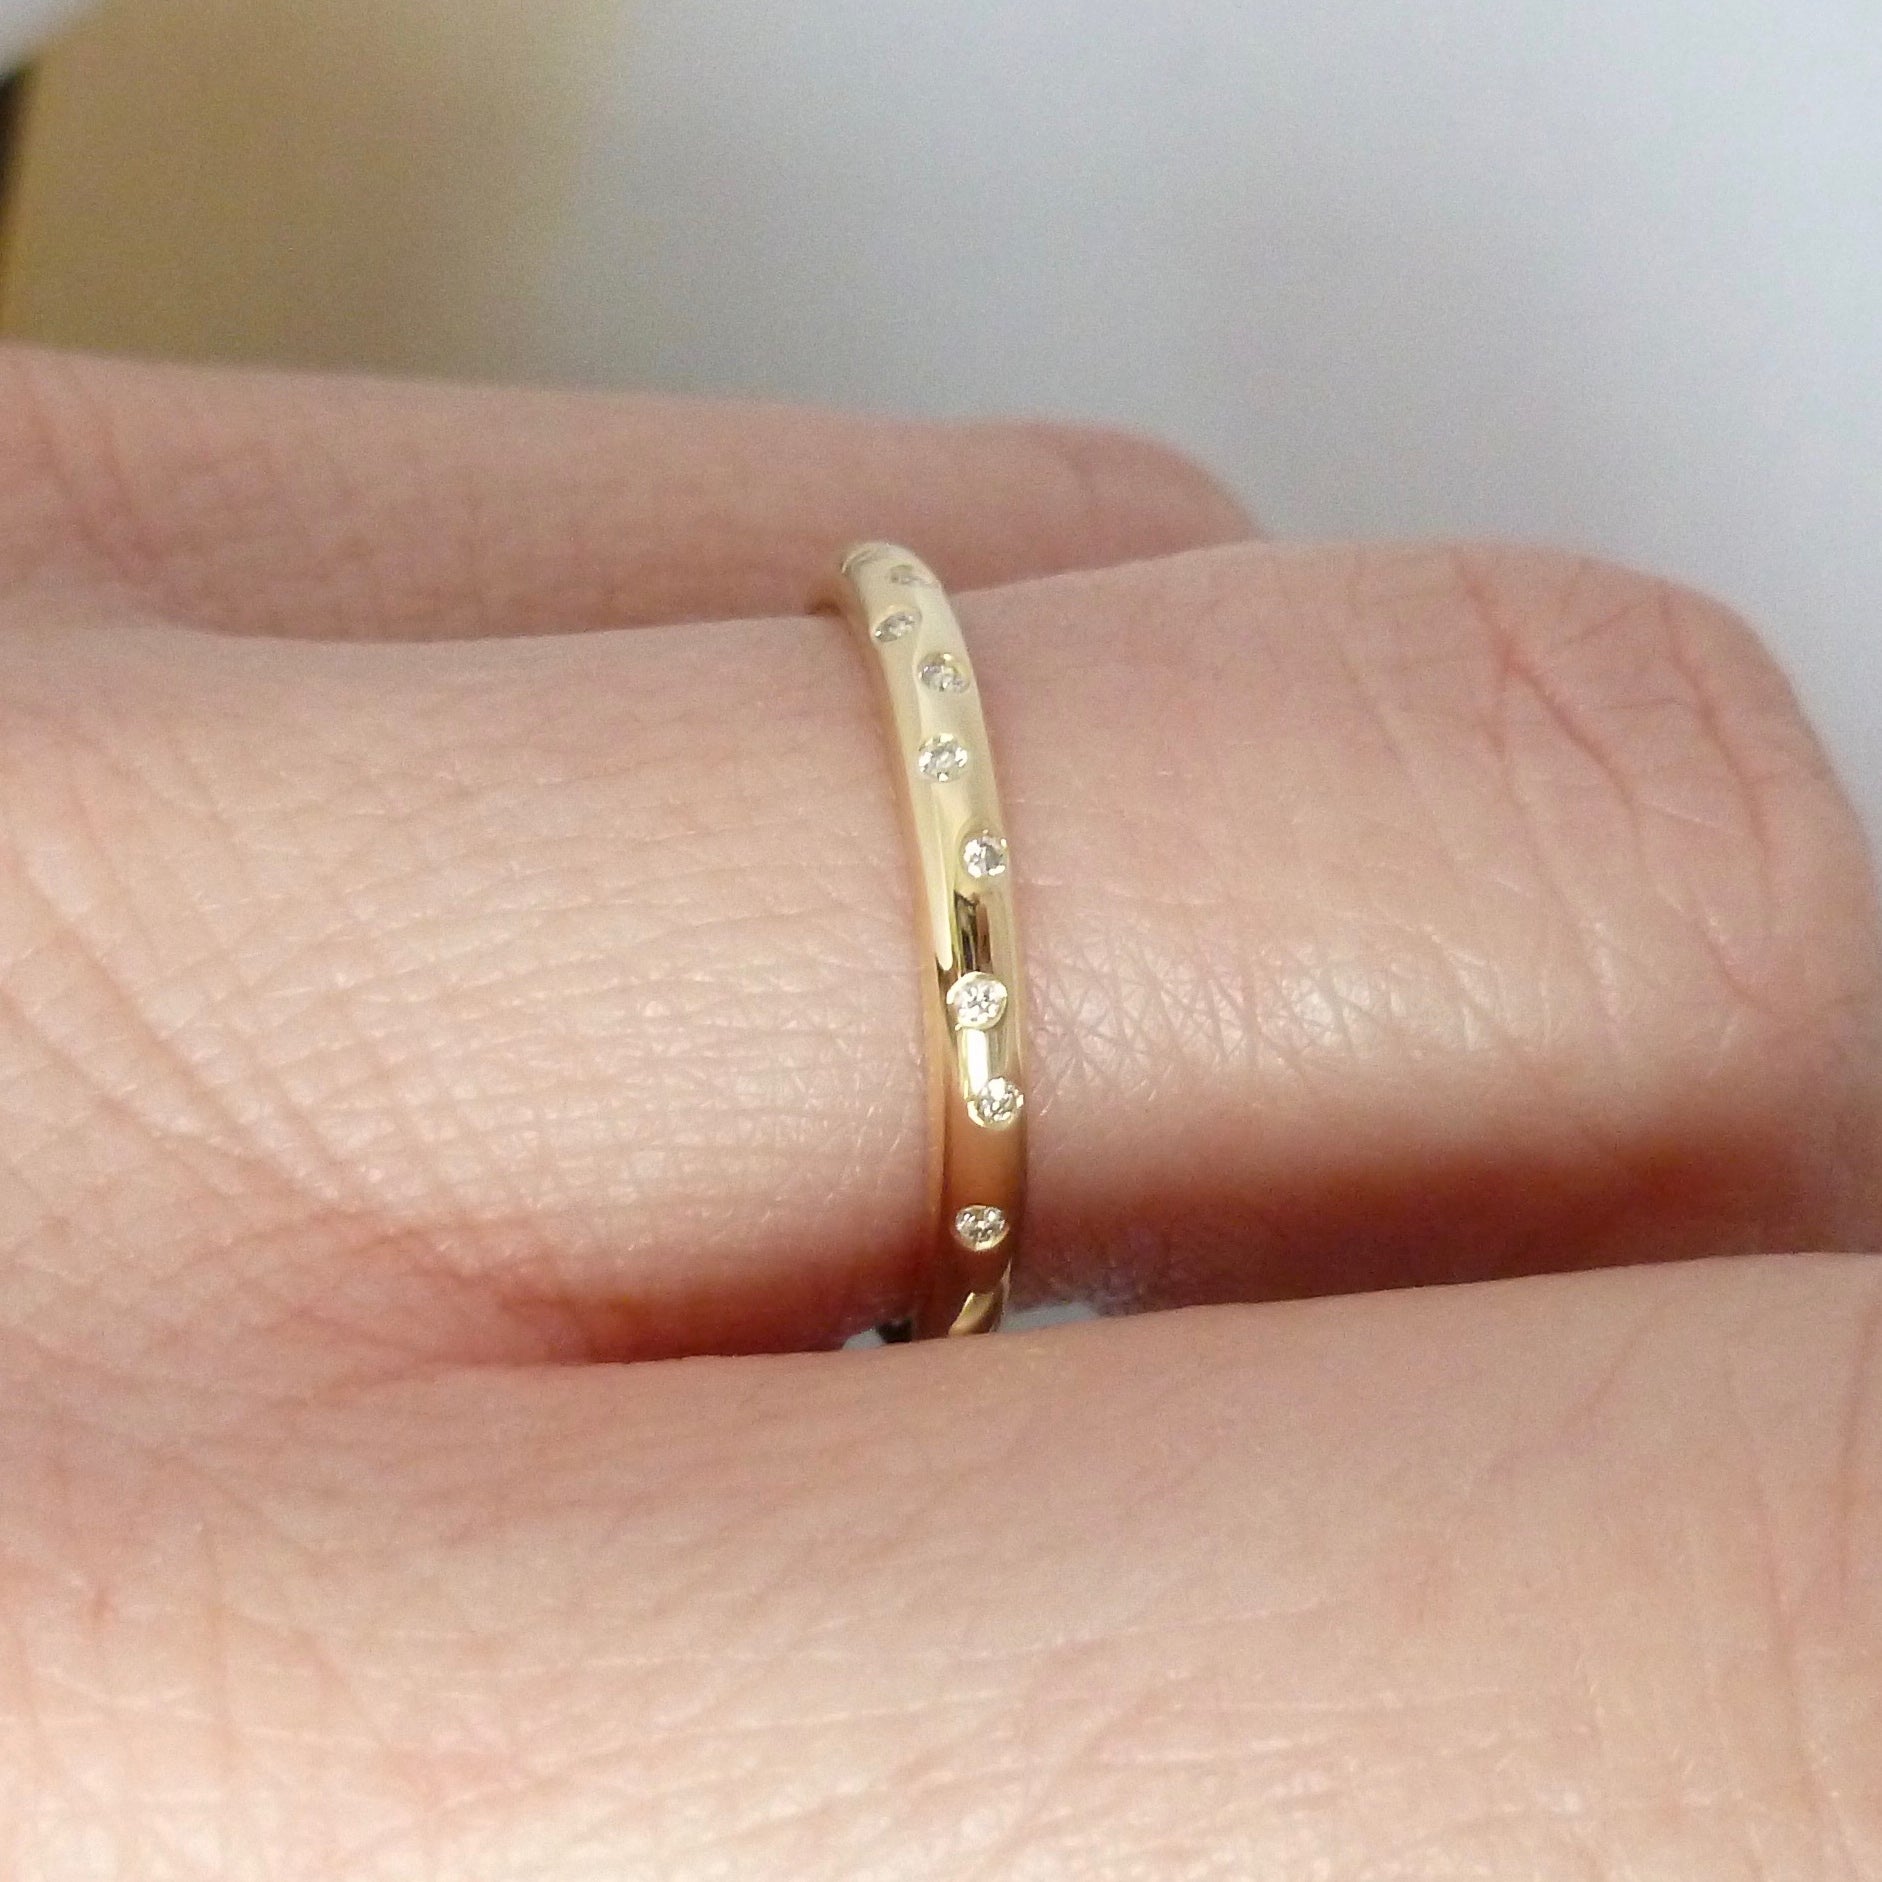 18ct gold and diamond ring - contemporary and unique handmade